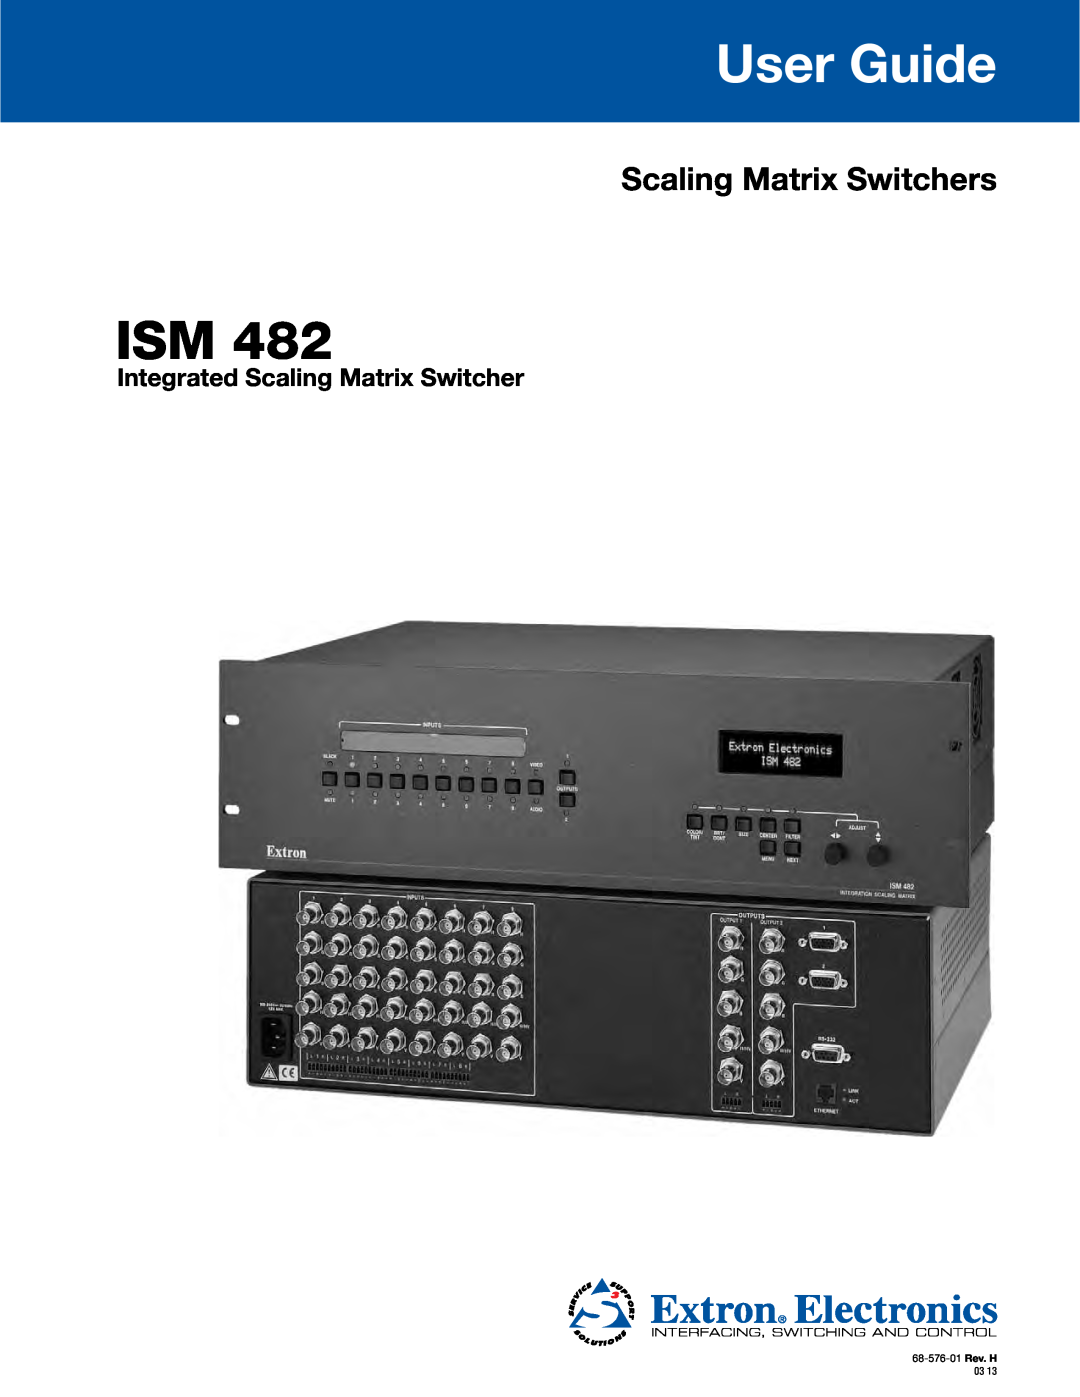 Extron electronic ISM 482 manual No Photo Available yet, User Guide, Scaling Matrix Switchers 